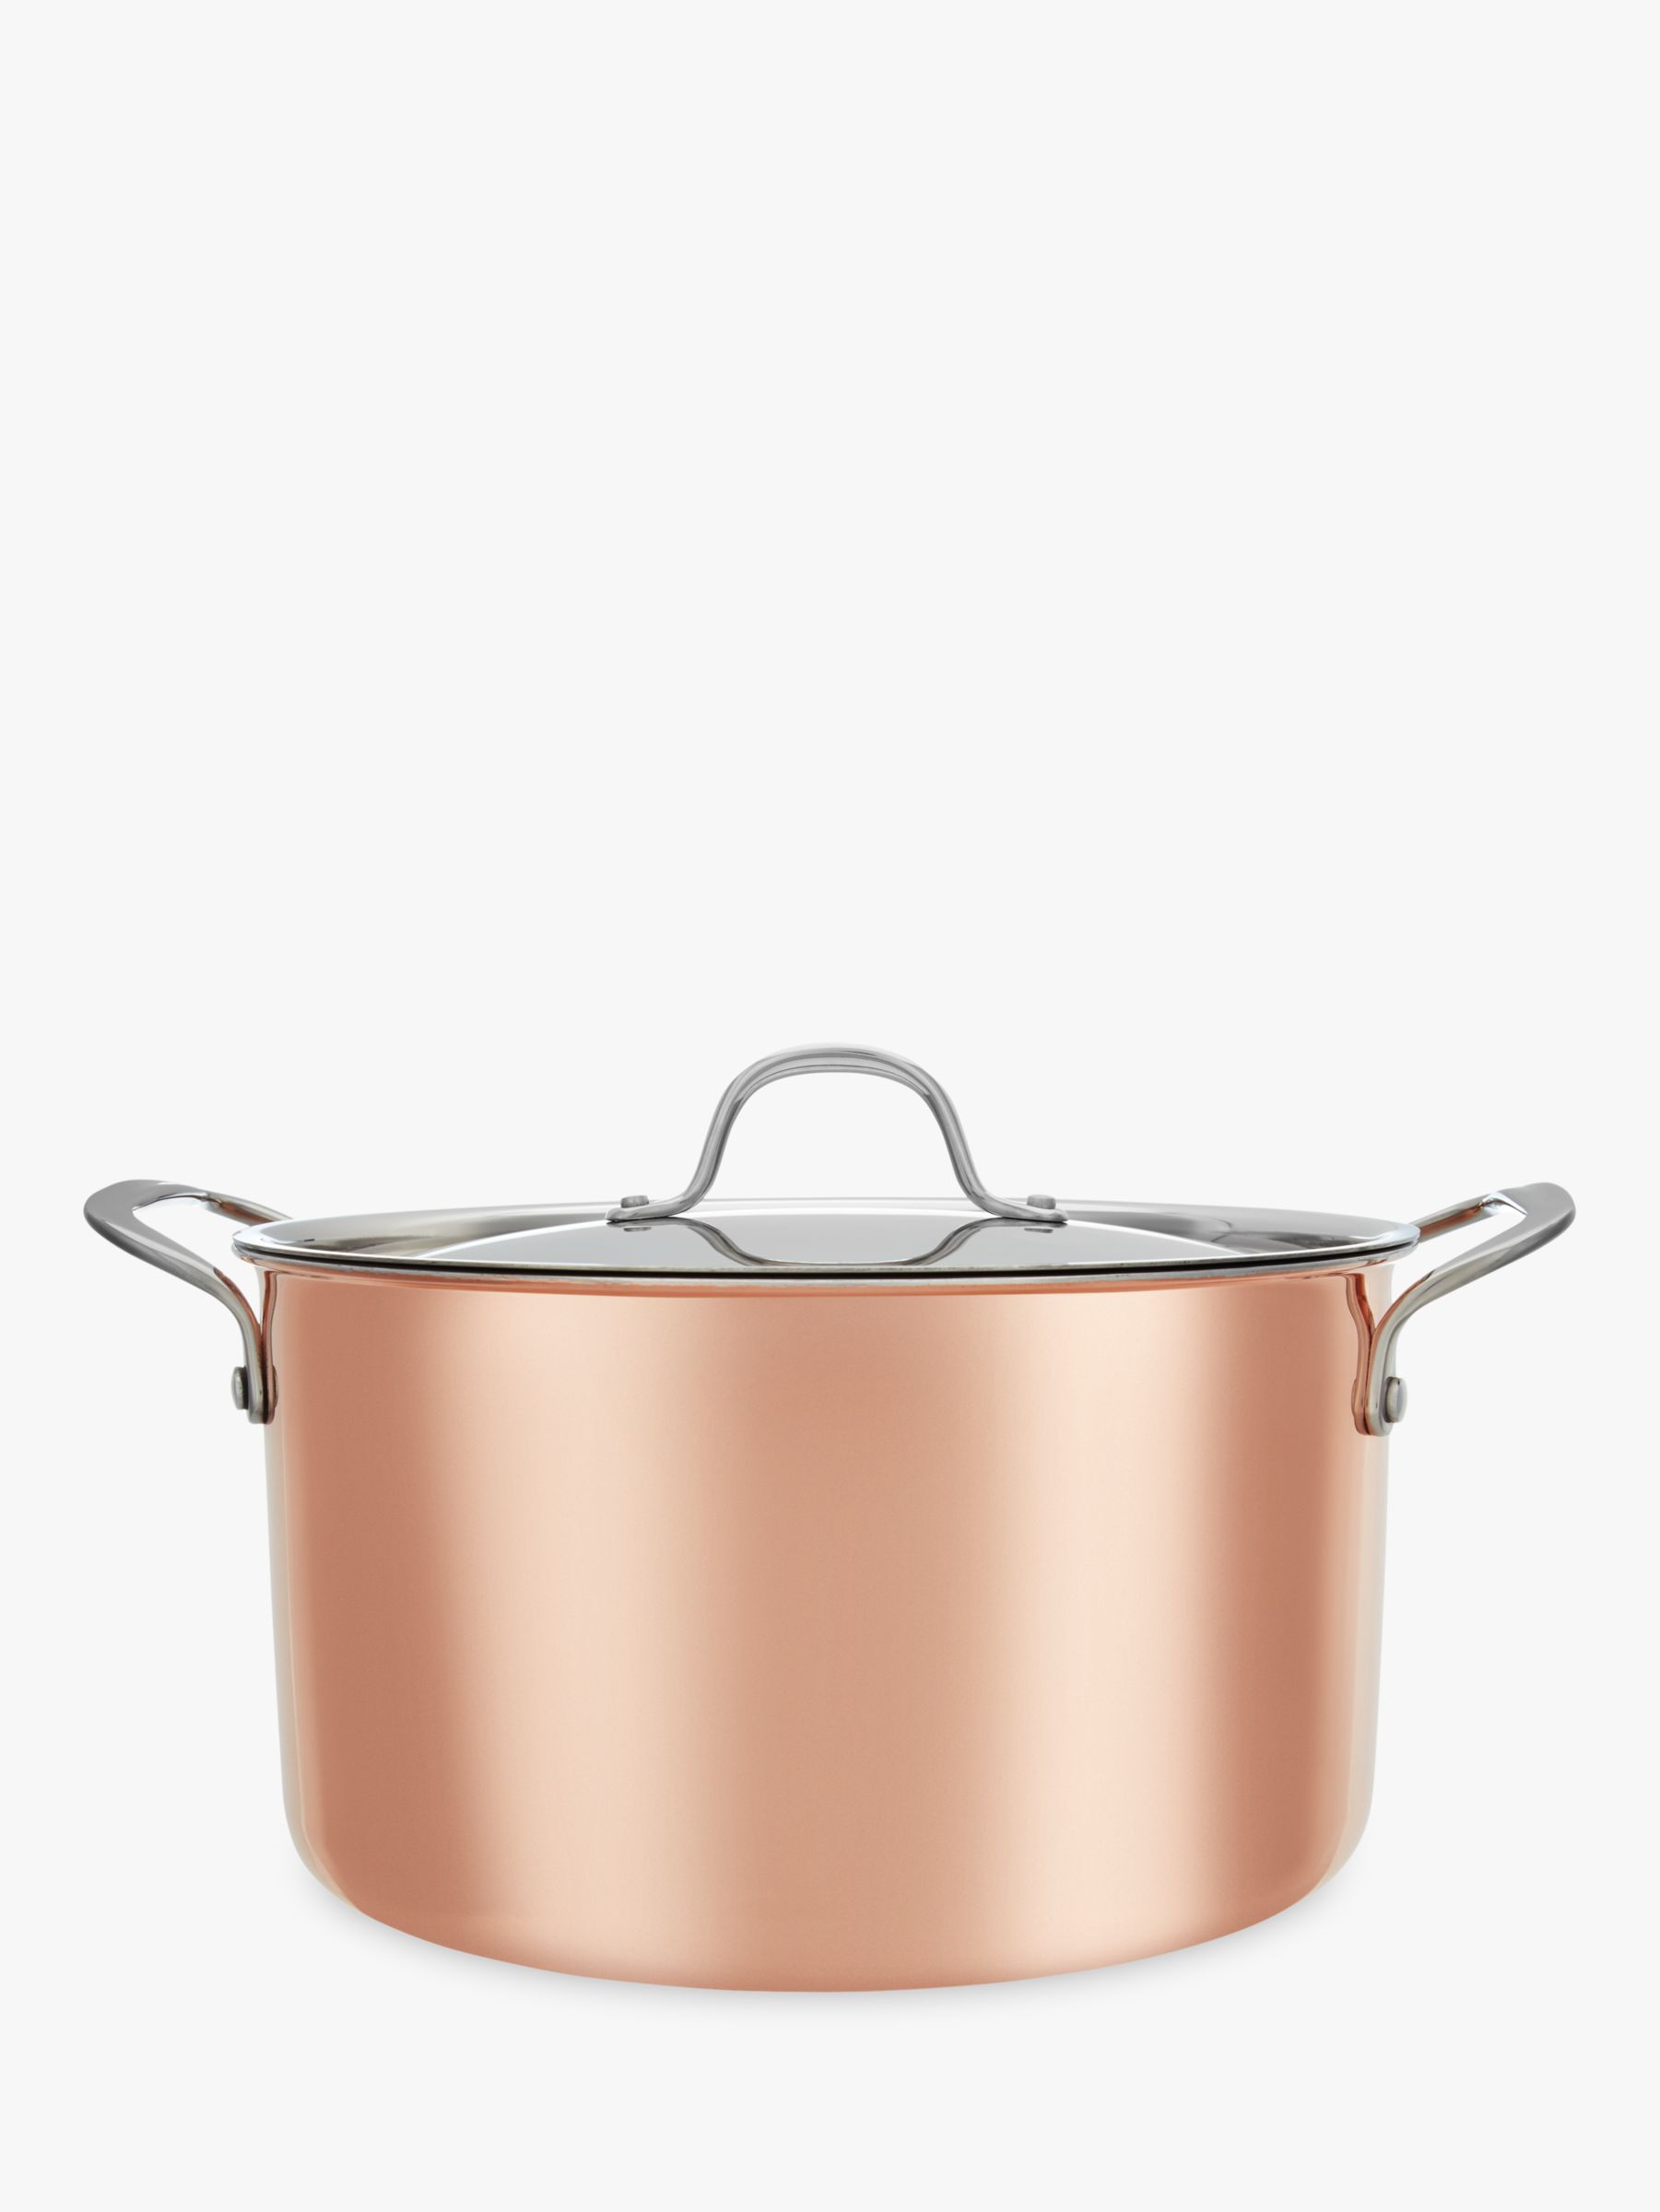 Croft Collection copper cookware